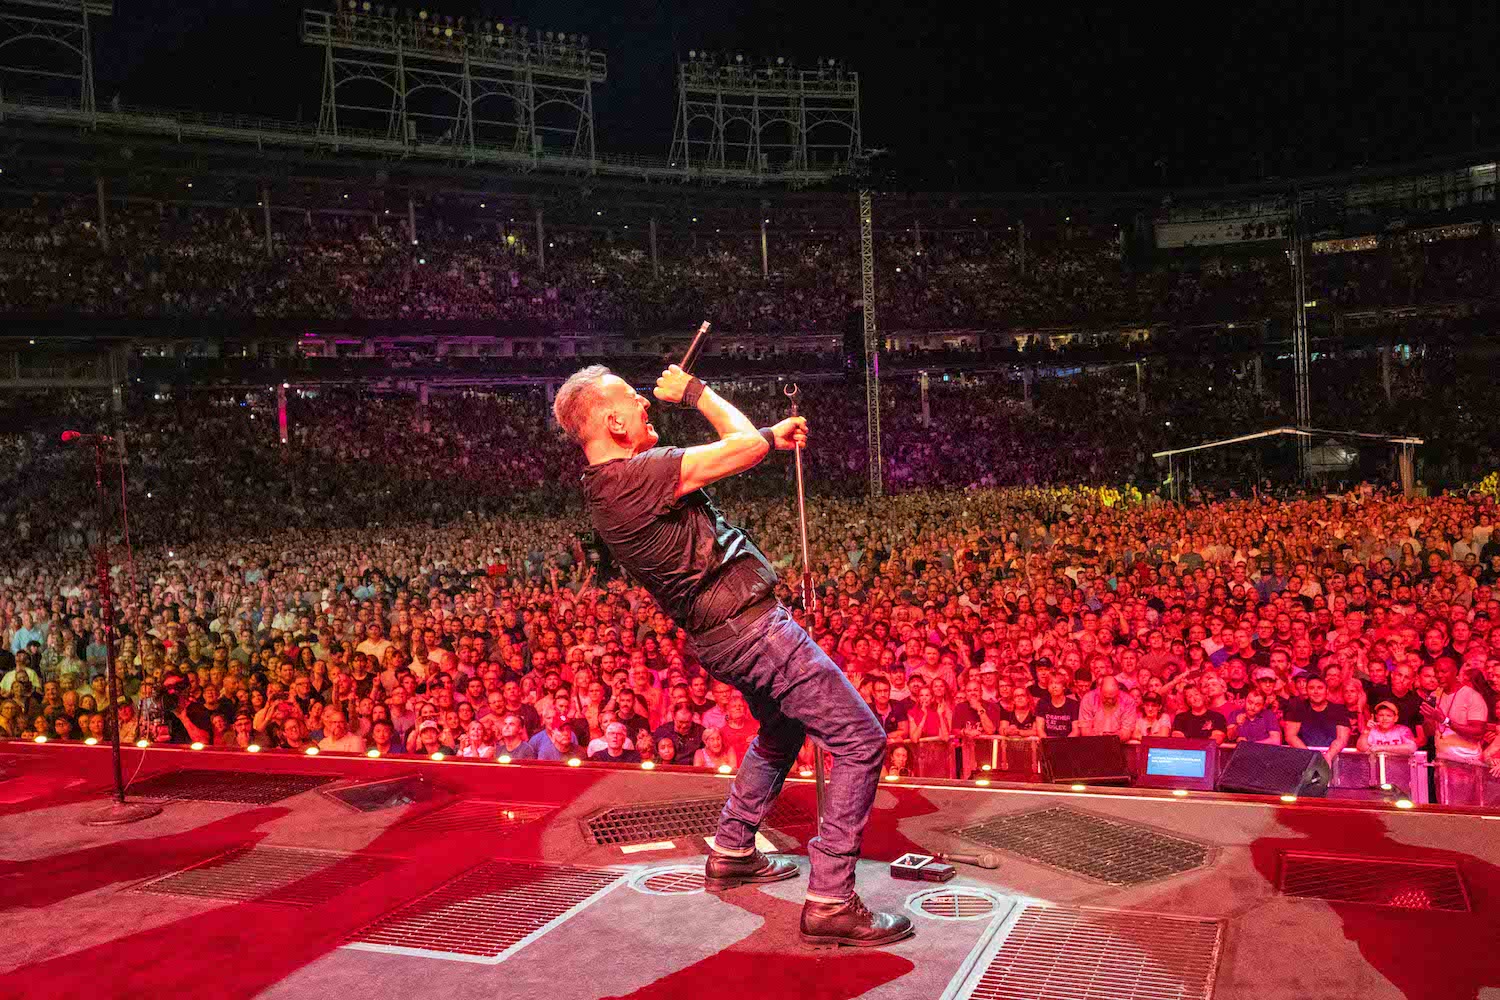 Bruce Springsteen & E Street Band at Wrigley Field, Chicago, Illinois on August 11, 2023.